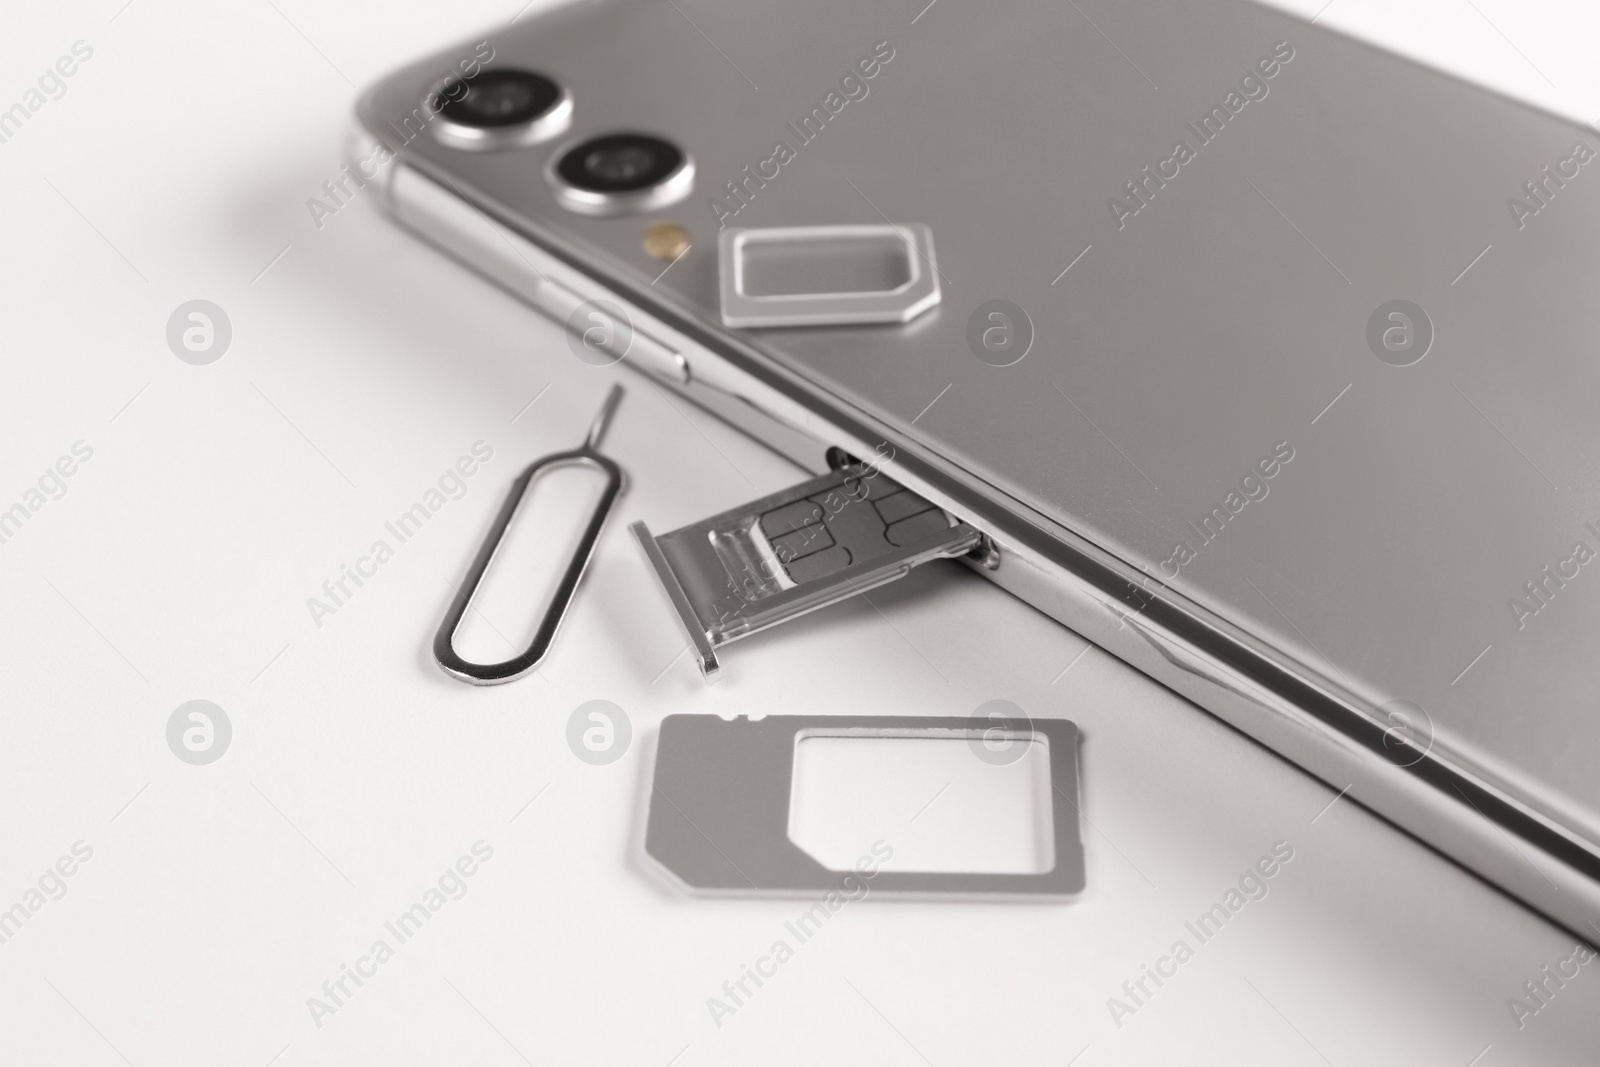 Photo of SIM card, mobile phone and ejector tool on white table